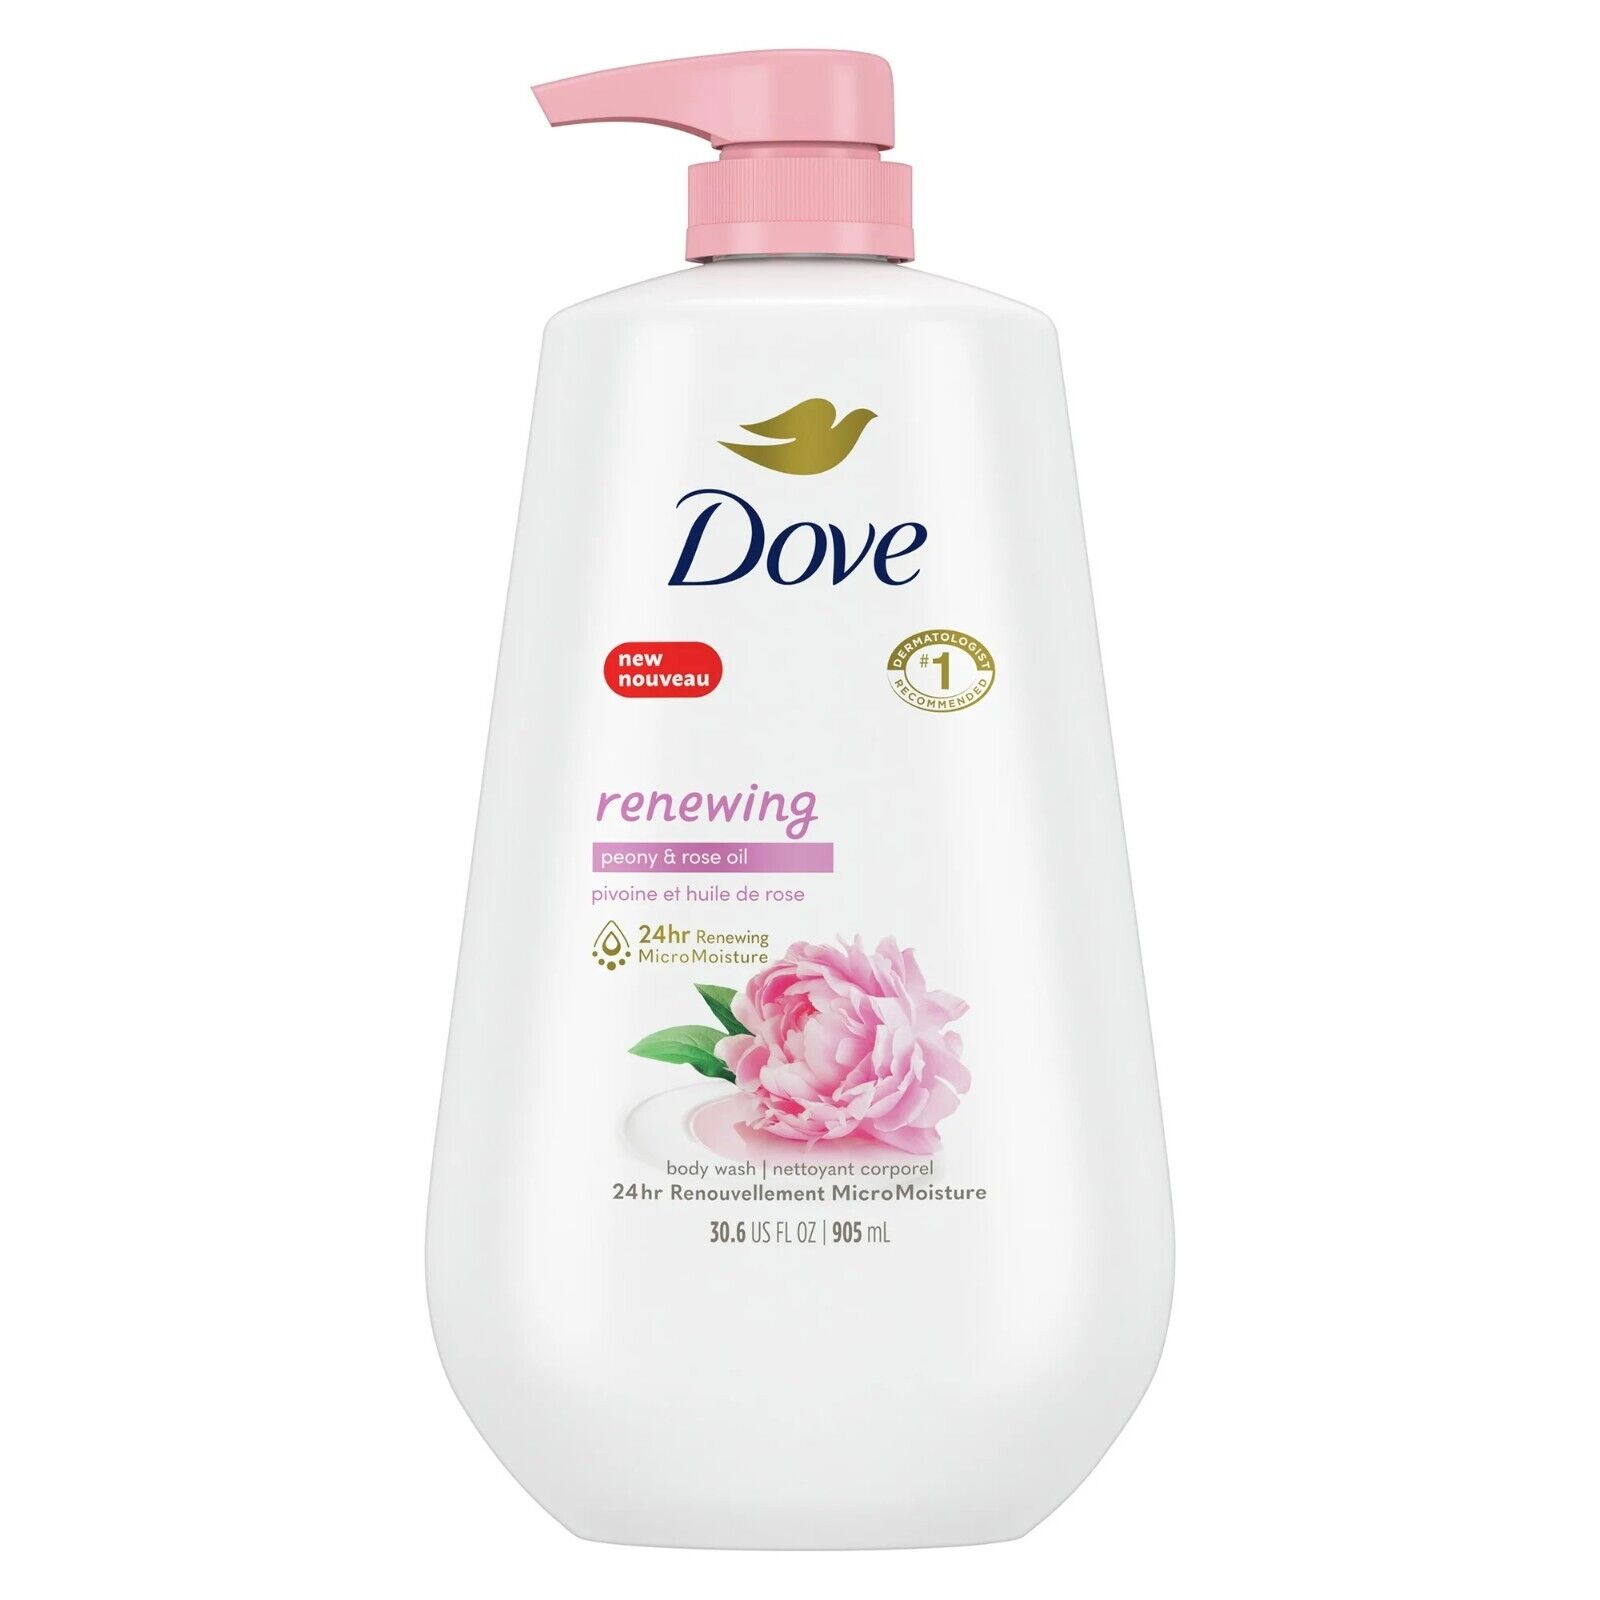 With Pump Peony & Rose Oil, 30.6 Oz, Smooth Skin